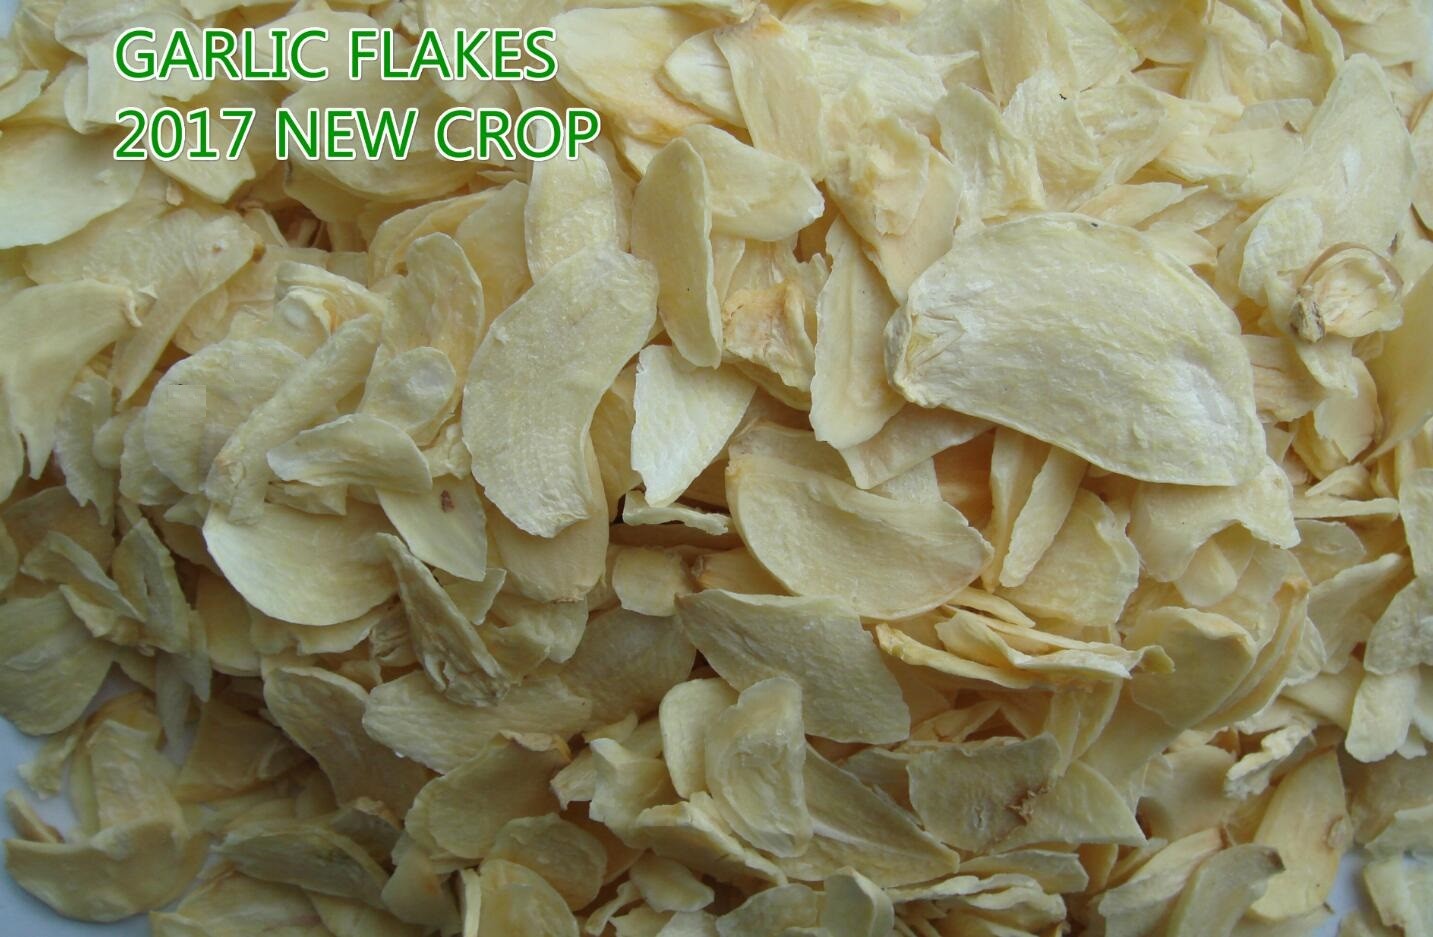 Wholesale Orgnic dehydrated garlic flakes2.0-26MM ,2017 new crop,pure natural garlic products from china suppliers